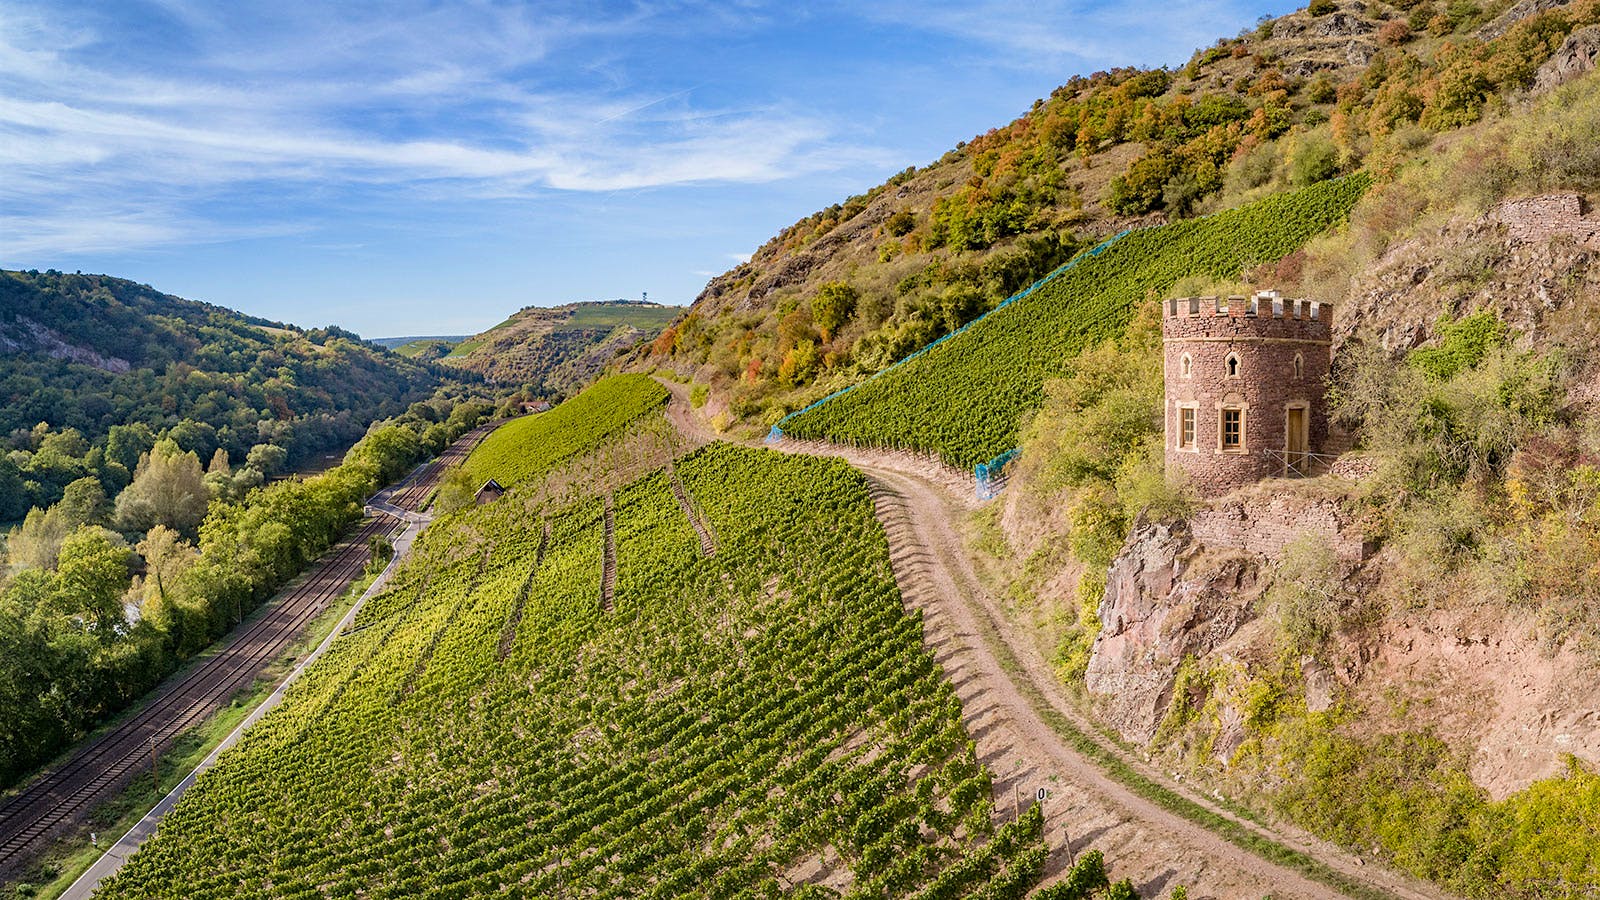 8 Charming German Rieslings Up to 91 Points